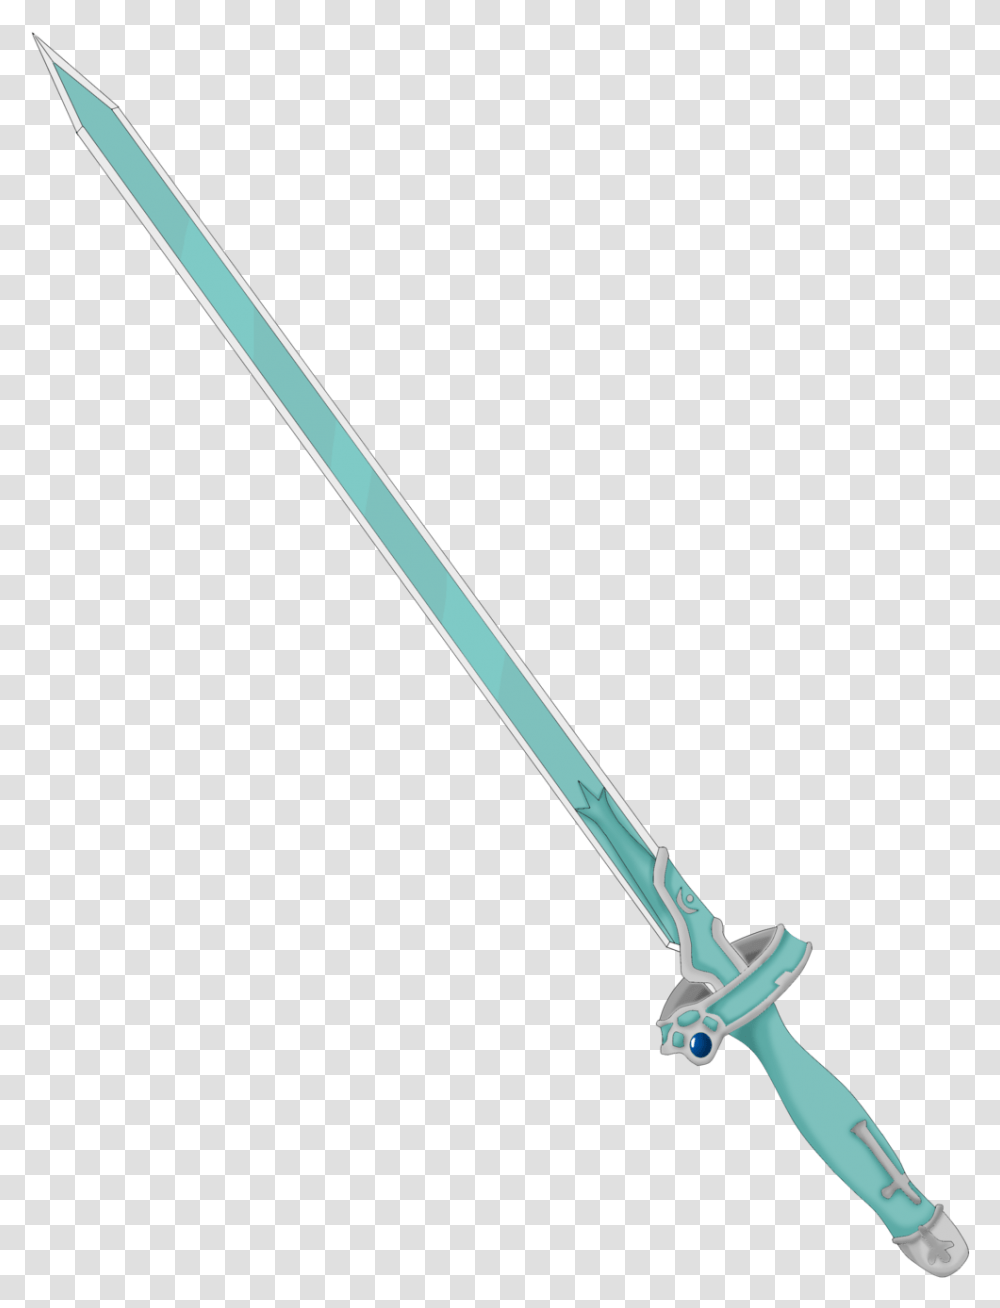 Http I Imgur Comzgw1d8x Blood Sword, Blade, Weapon, Weaponry Transparent Png